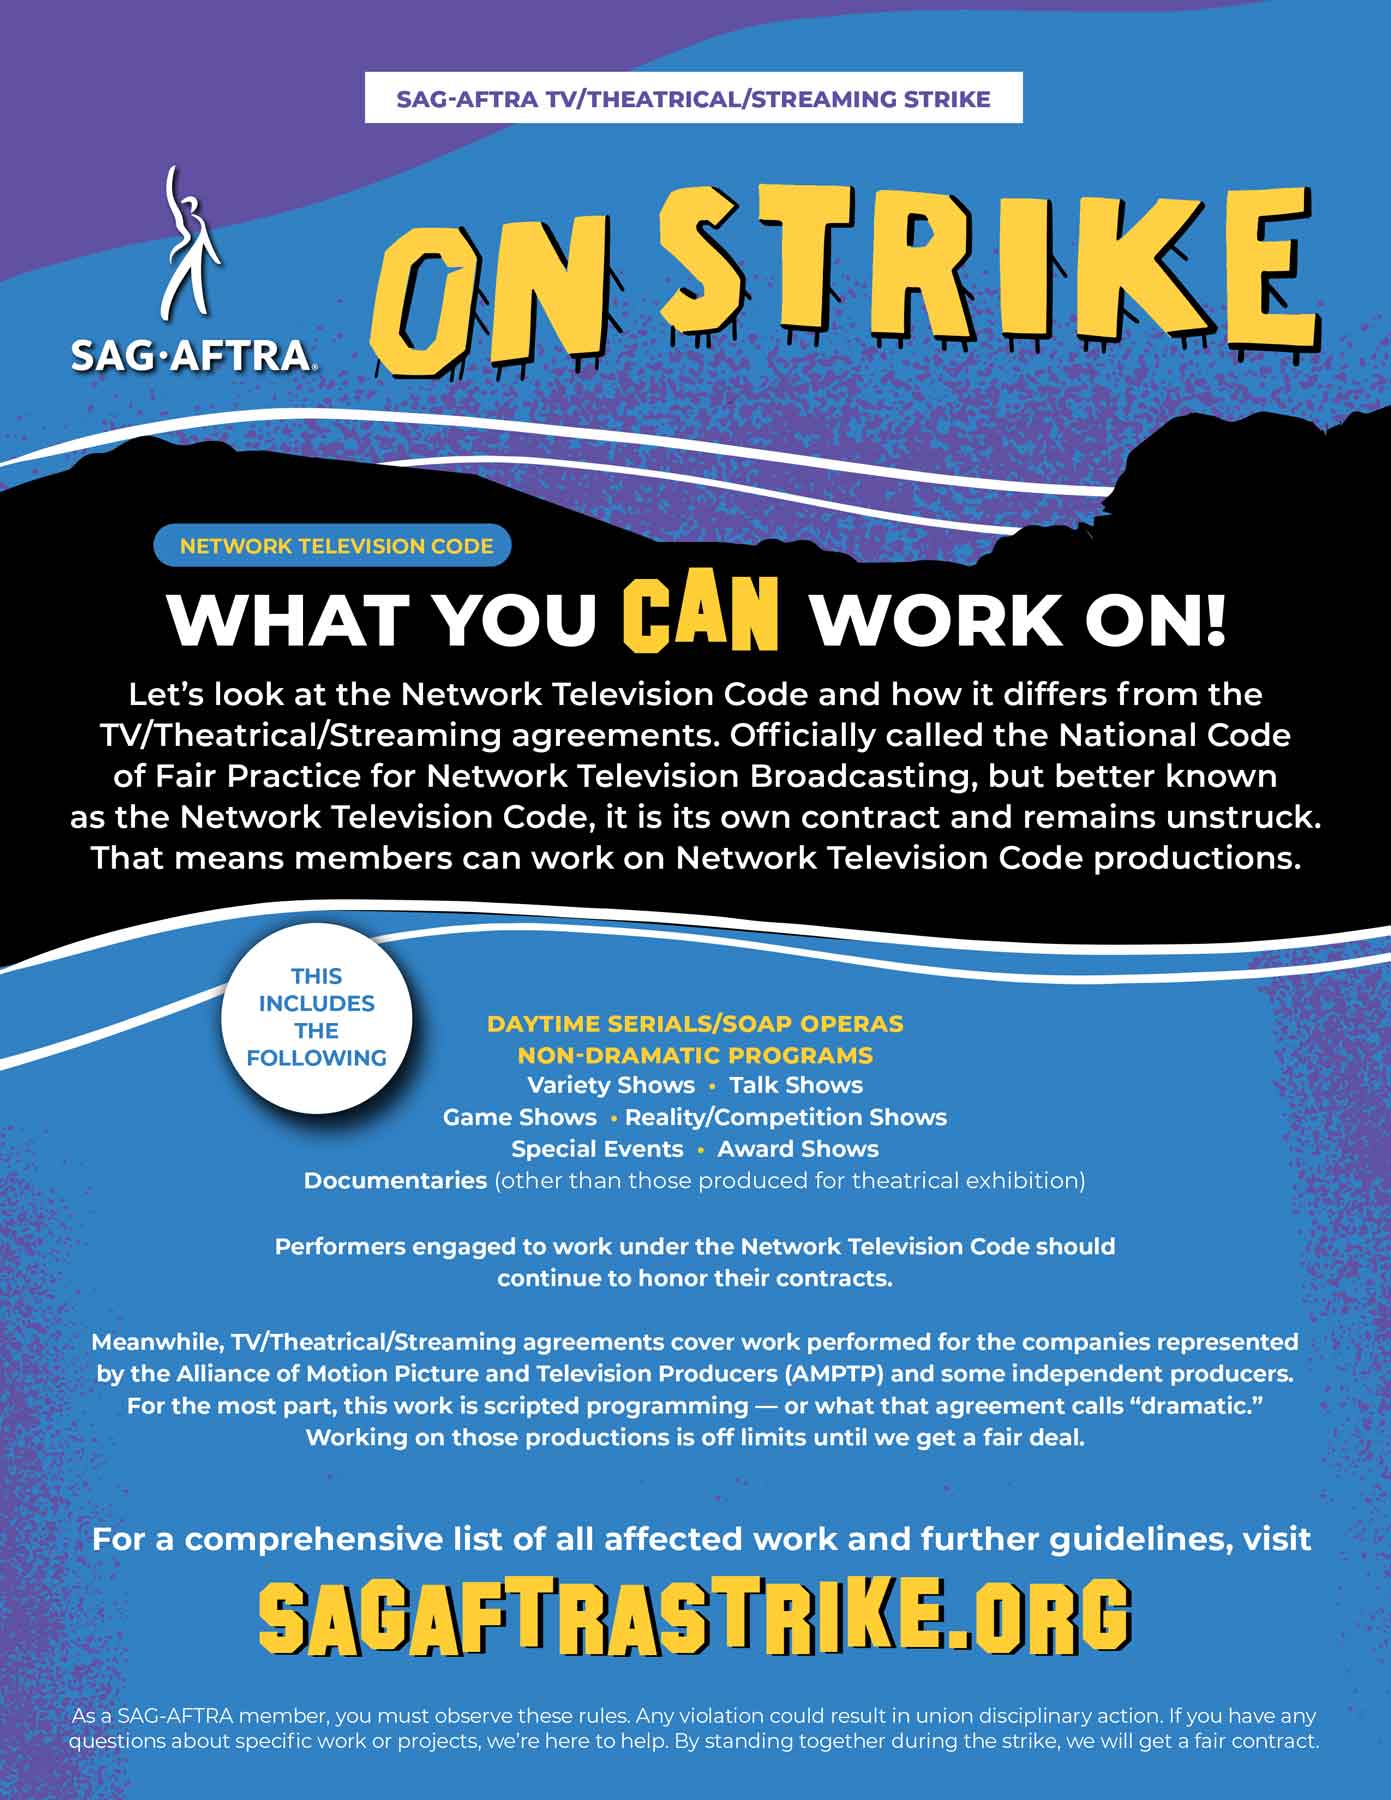 What Network Code projects can SAG-AFTRA members still work on?